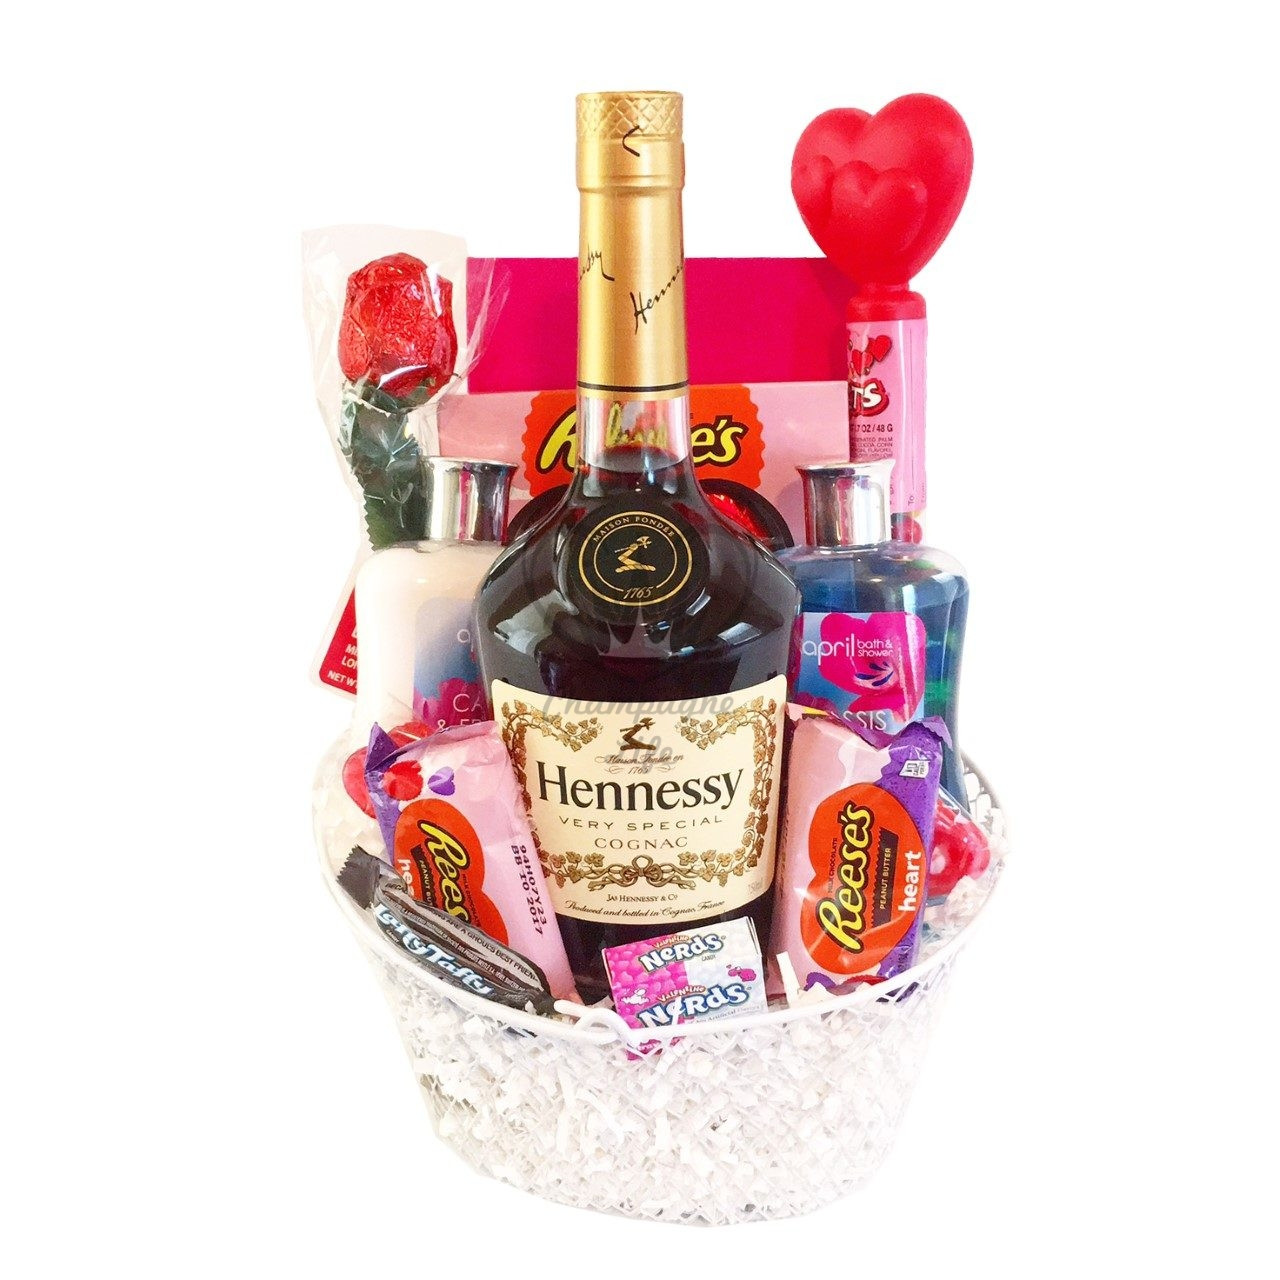 Hennessy Gift Ideas
 Hennessy Gift Baskets